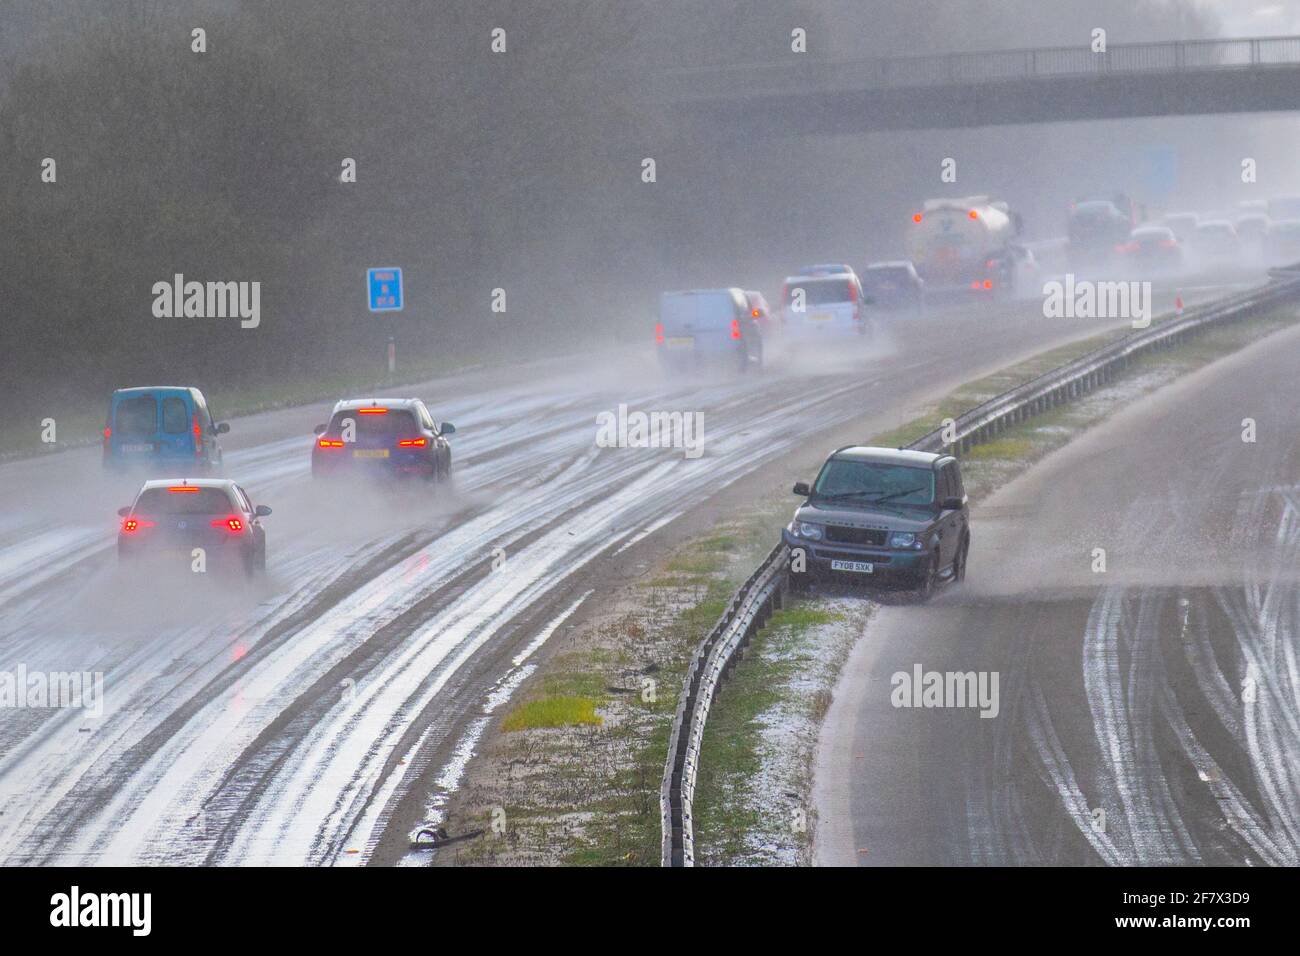 Motorway accident after driving in the middle of a hailstorm in hazardous driving  conditions in Chorley Lancashire. April 2021 UK Weather;  Motorway mayhem as freak hail stone shower makes driving tricky with a series of collisions in Chorley. Car crashes into central reservation, 4 wheel drive vehicles in separate incidents collide with the armcor on the M61 central reservation. Credit MediaWorldImages/AlamyLivenews Stock Photo